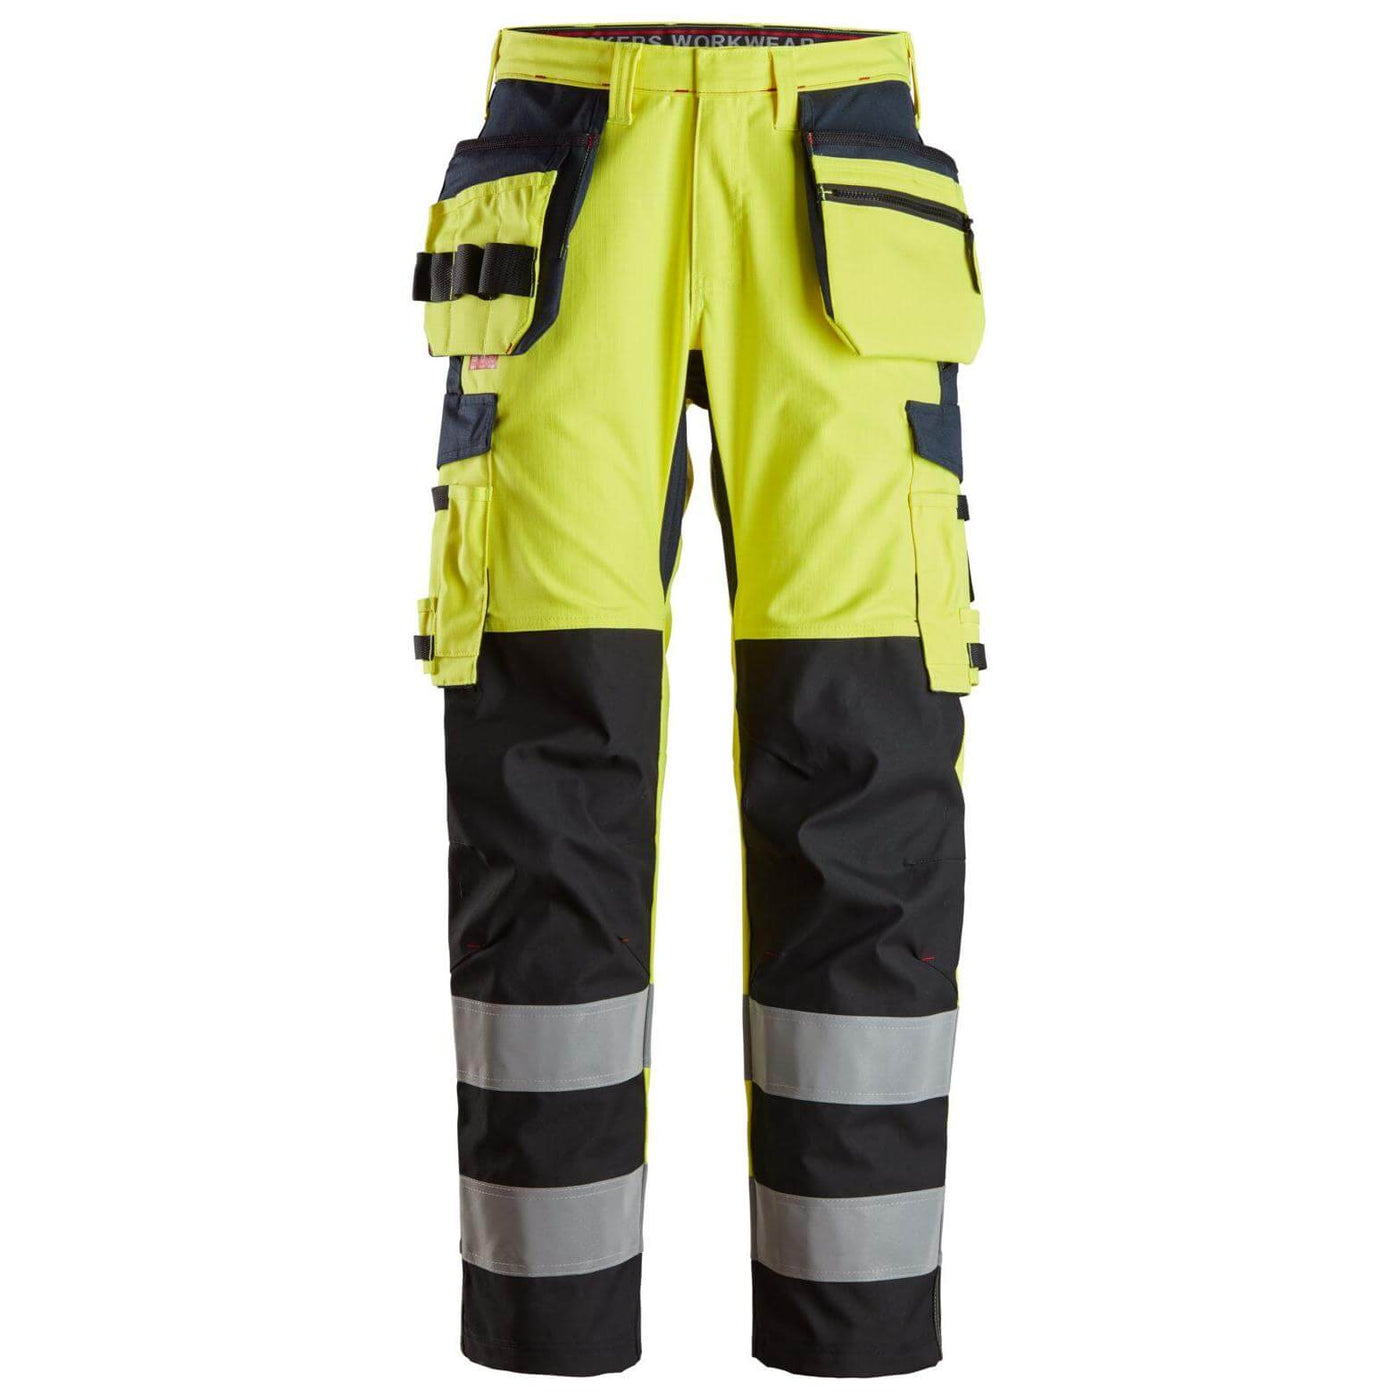 Snickers 6264 ProtecWork Hi Vis Trousers with Reinforced Shin and Holster Pockets Class 2 Hi Vis Yellow Navy Blue 3823267 #colour_hi-vis-yellow-navy-blue